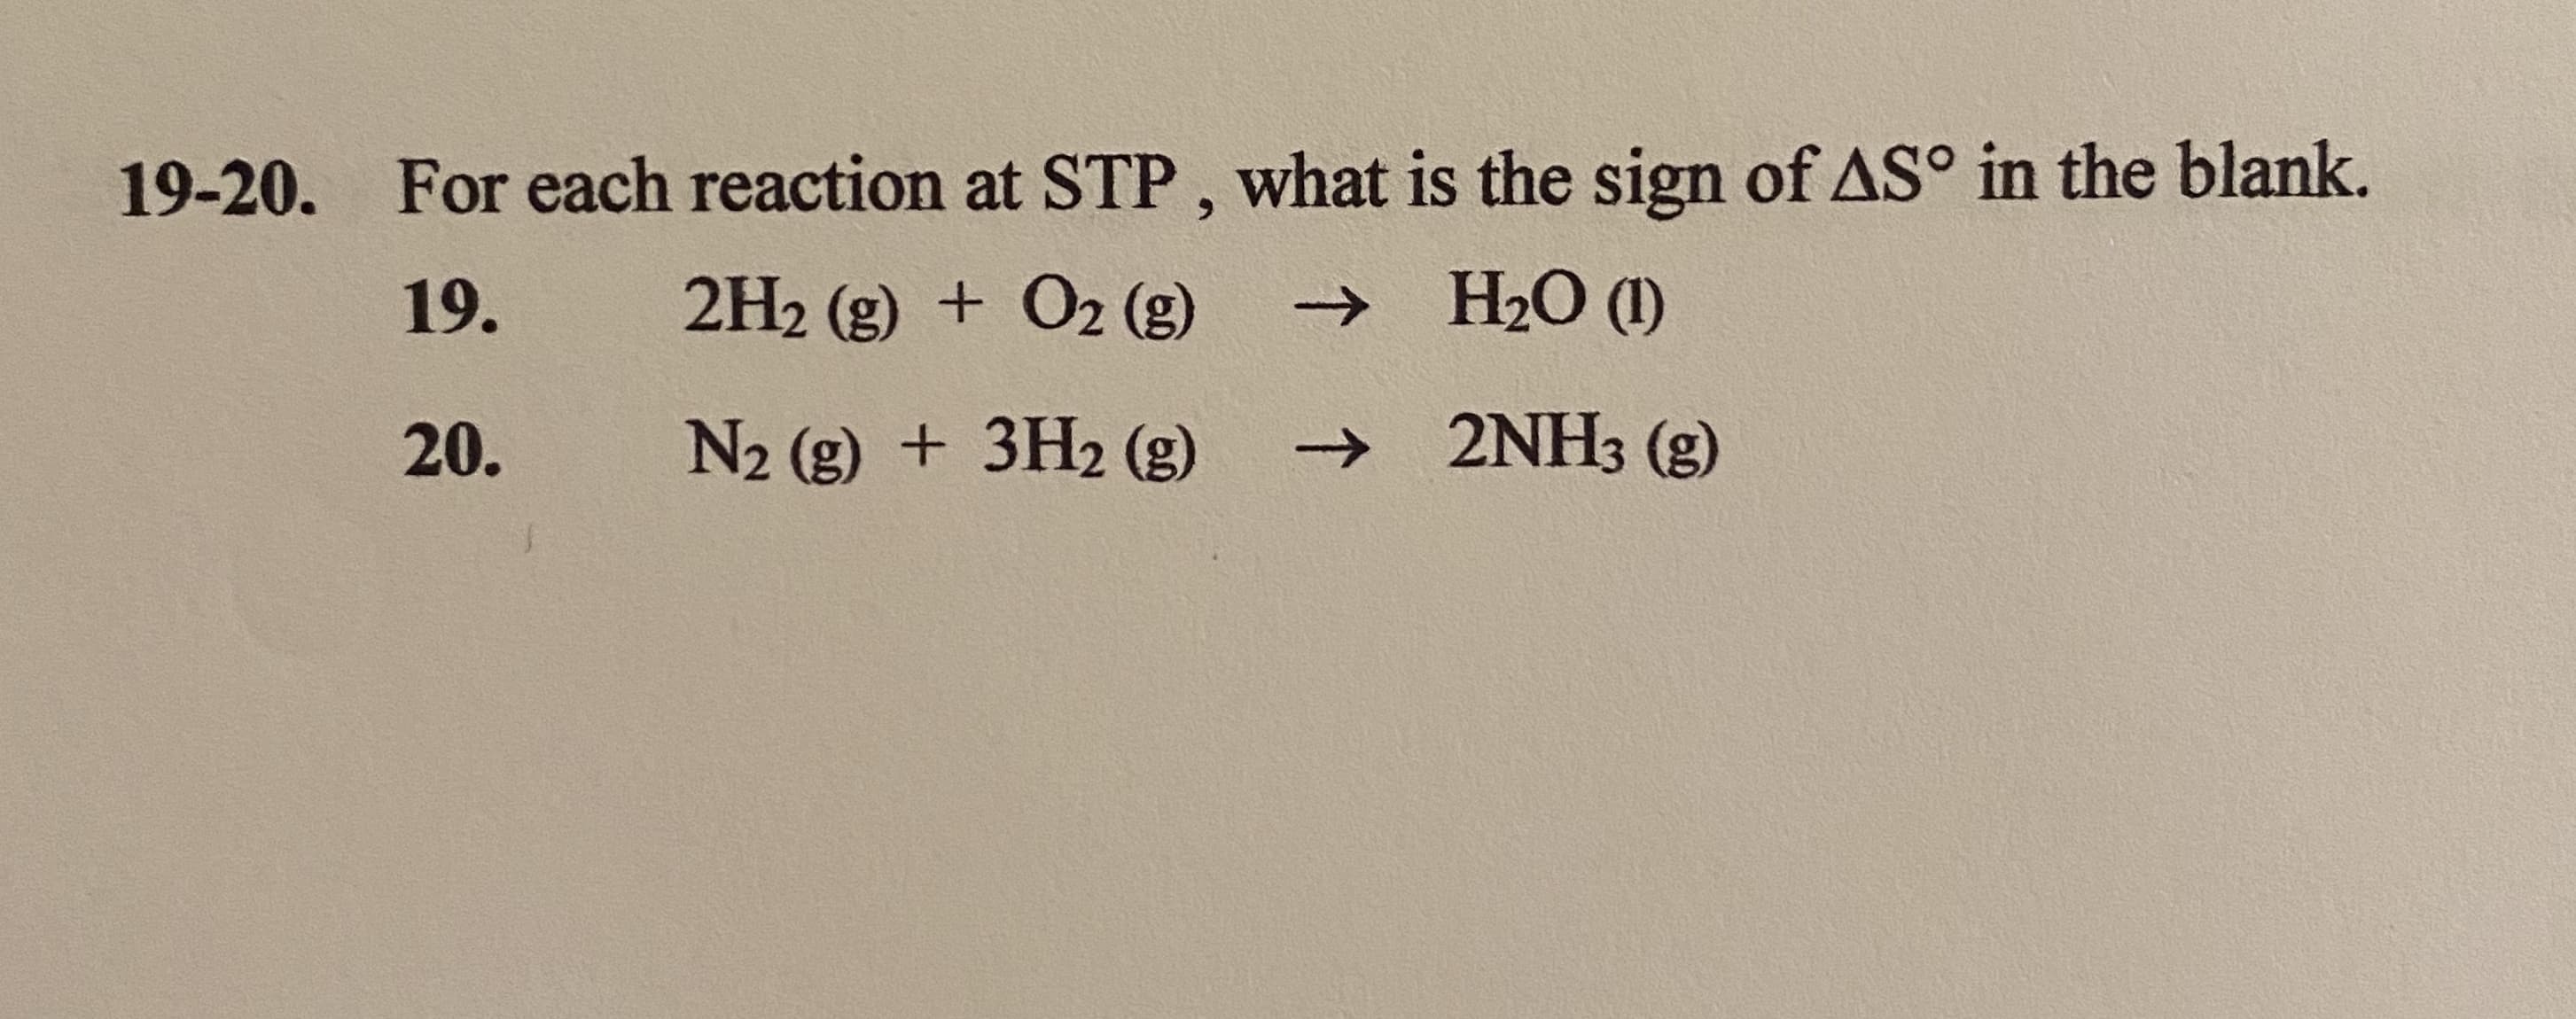 For each reaction at STP, what is the sign of AS° in the blank.
19.
2H2 (g) + O2 (g)
→ H2O (1)
20.
N2 (g) + 3H2 (g)
→ 2NH3 (g)
